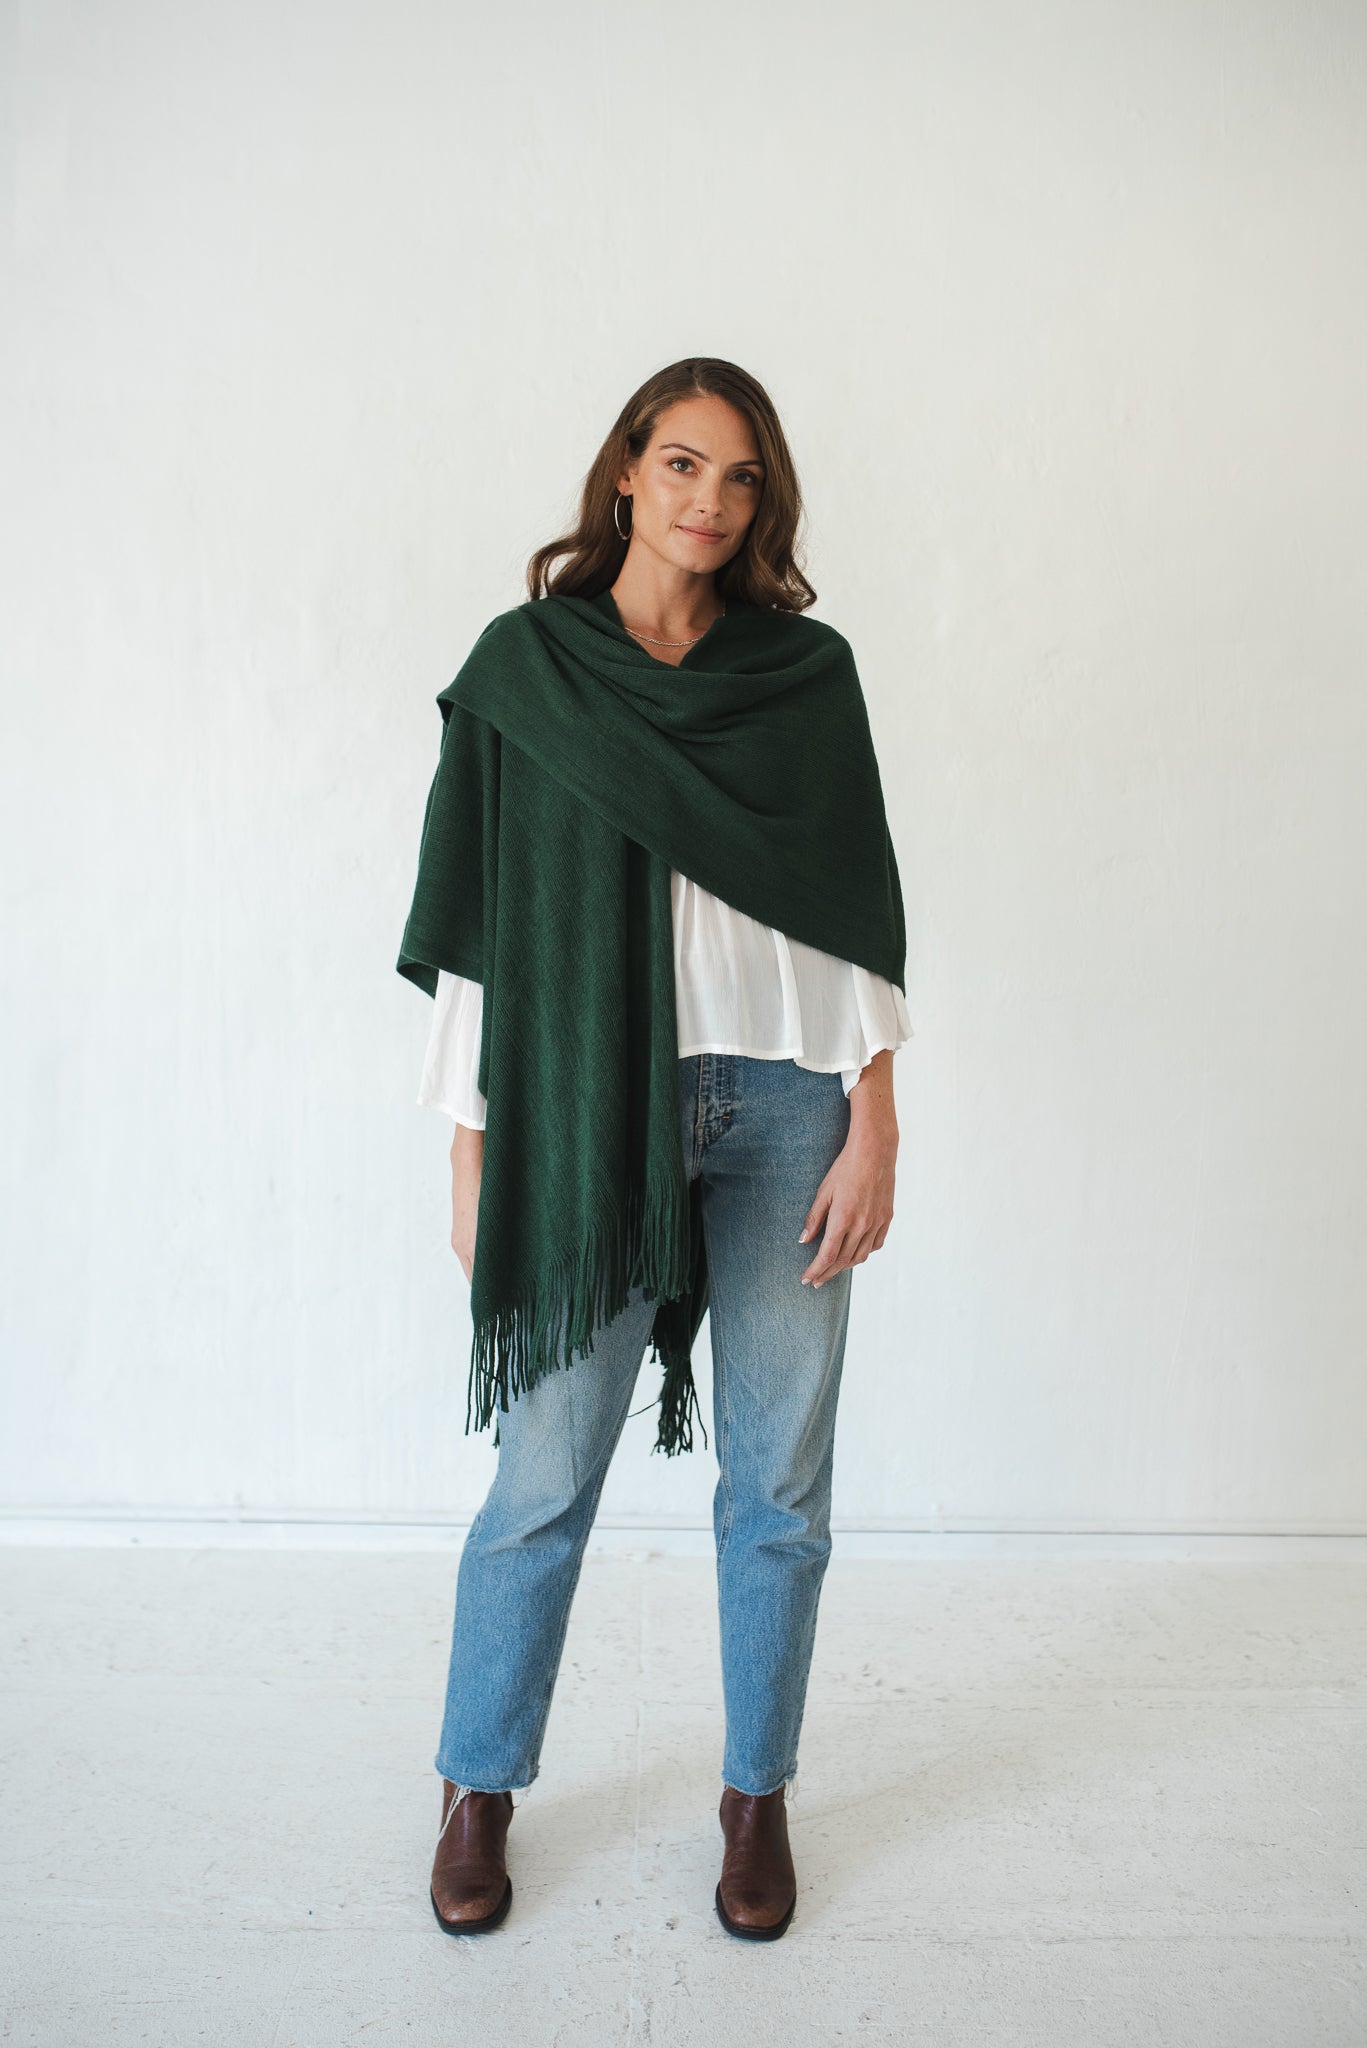 Scarves Shawls and Wraps - Holley Day Australia